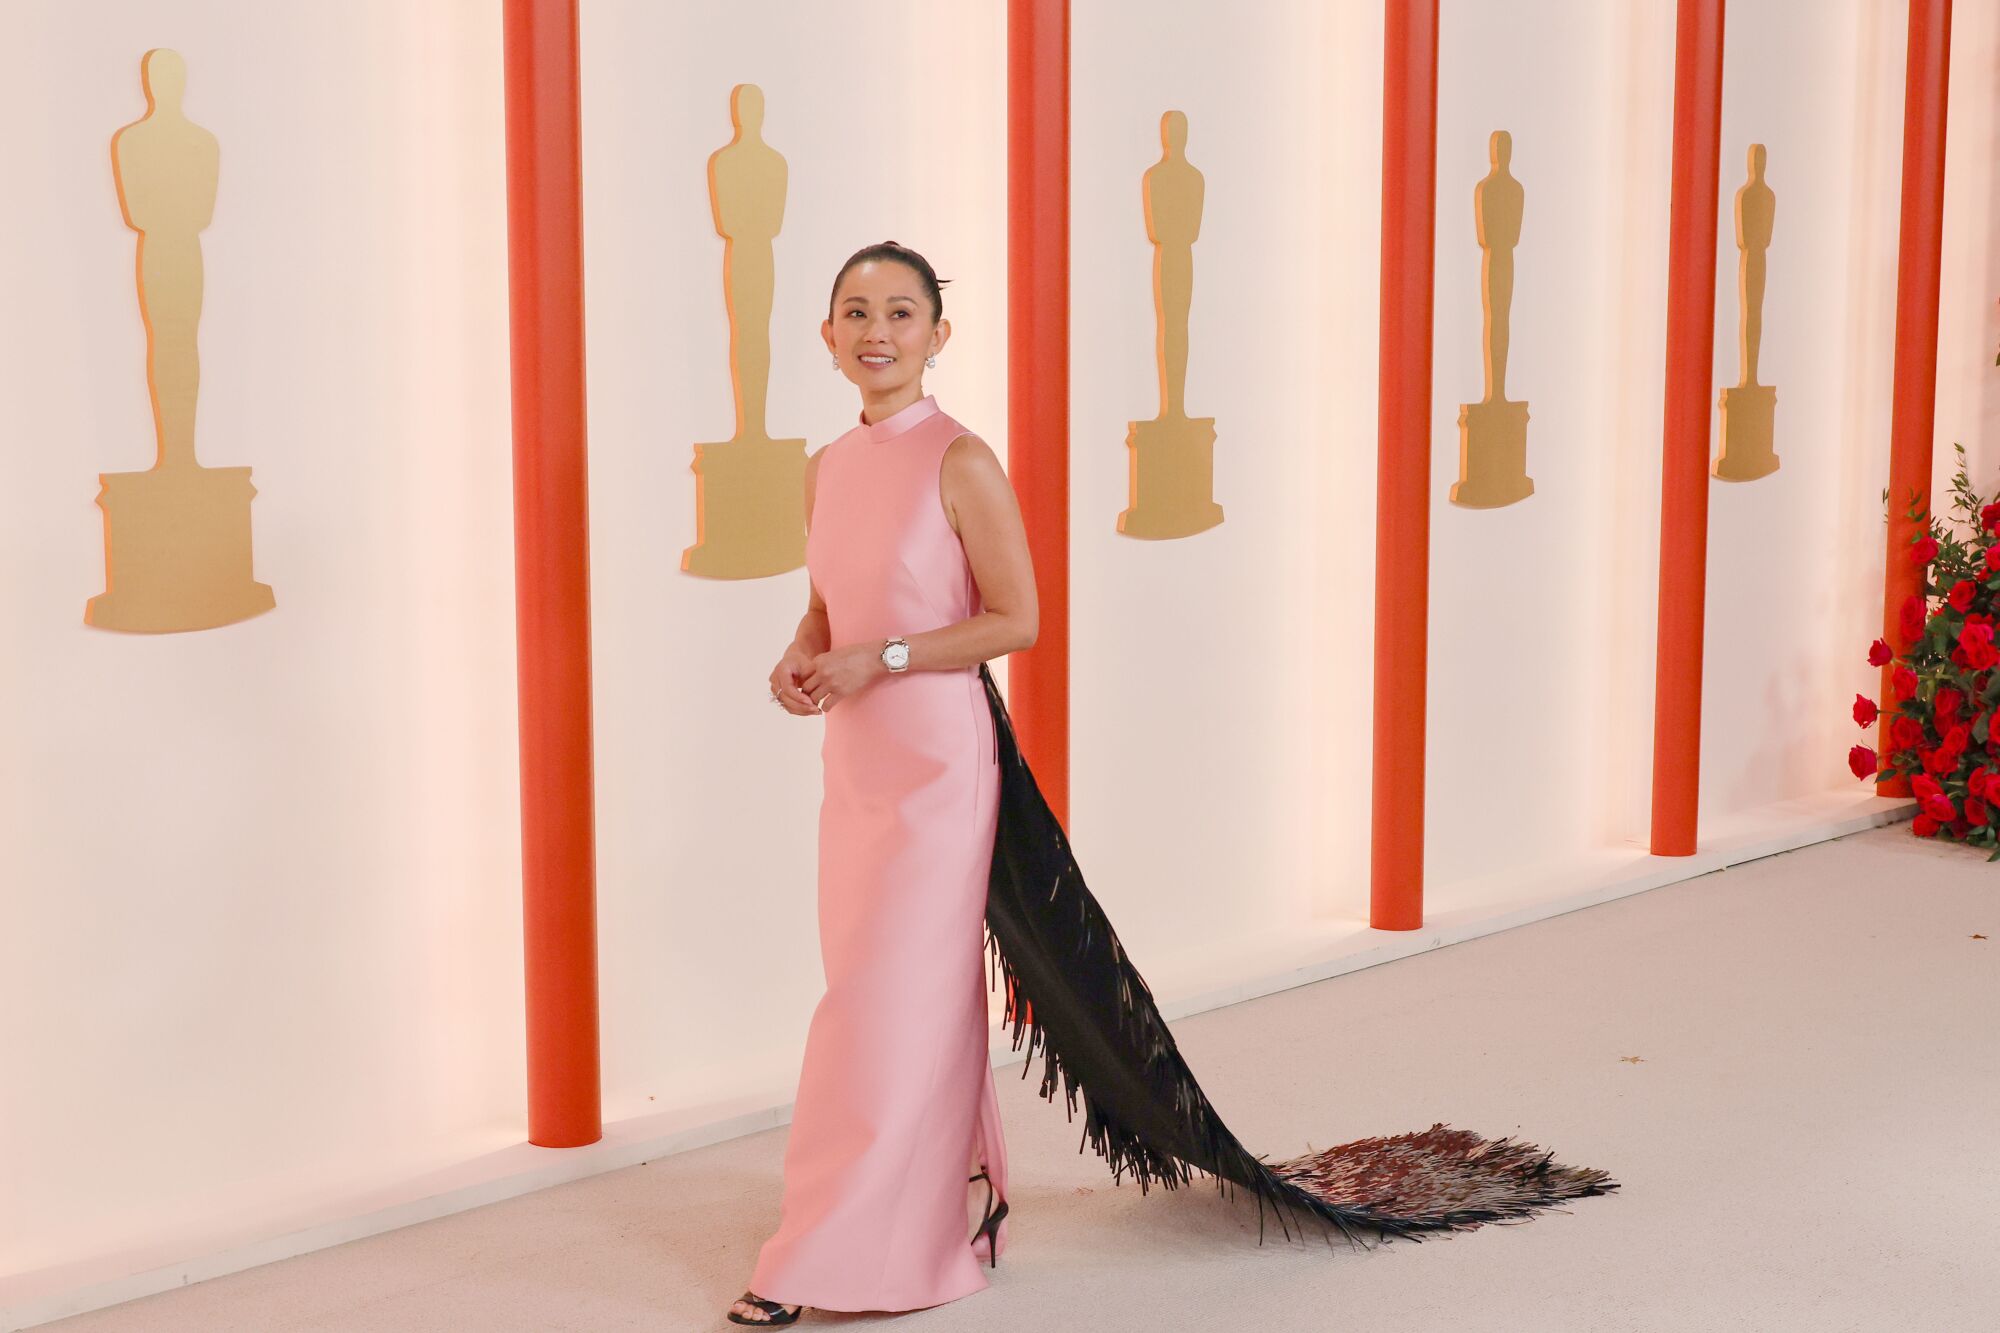 Hong Chau in a pink dress with a darker fringed train.